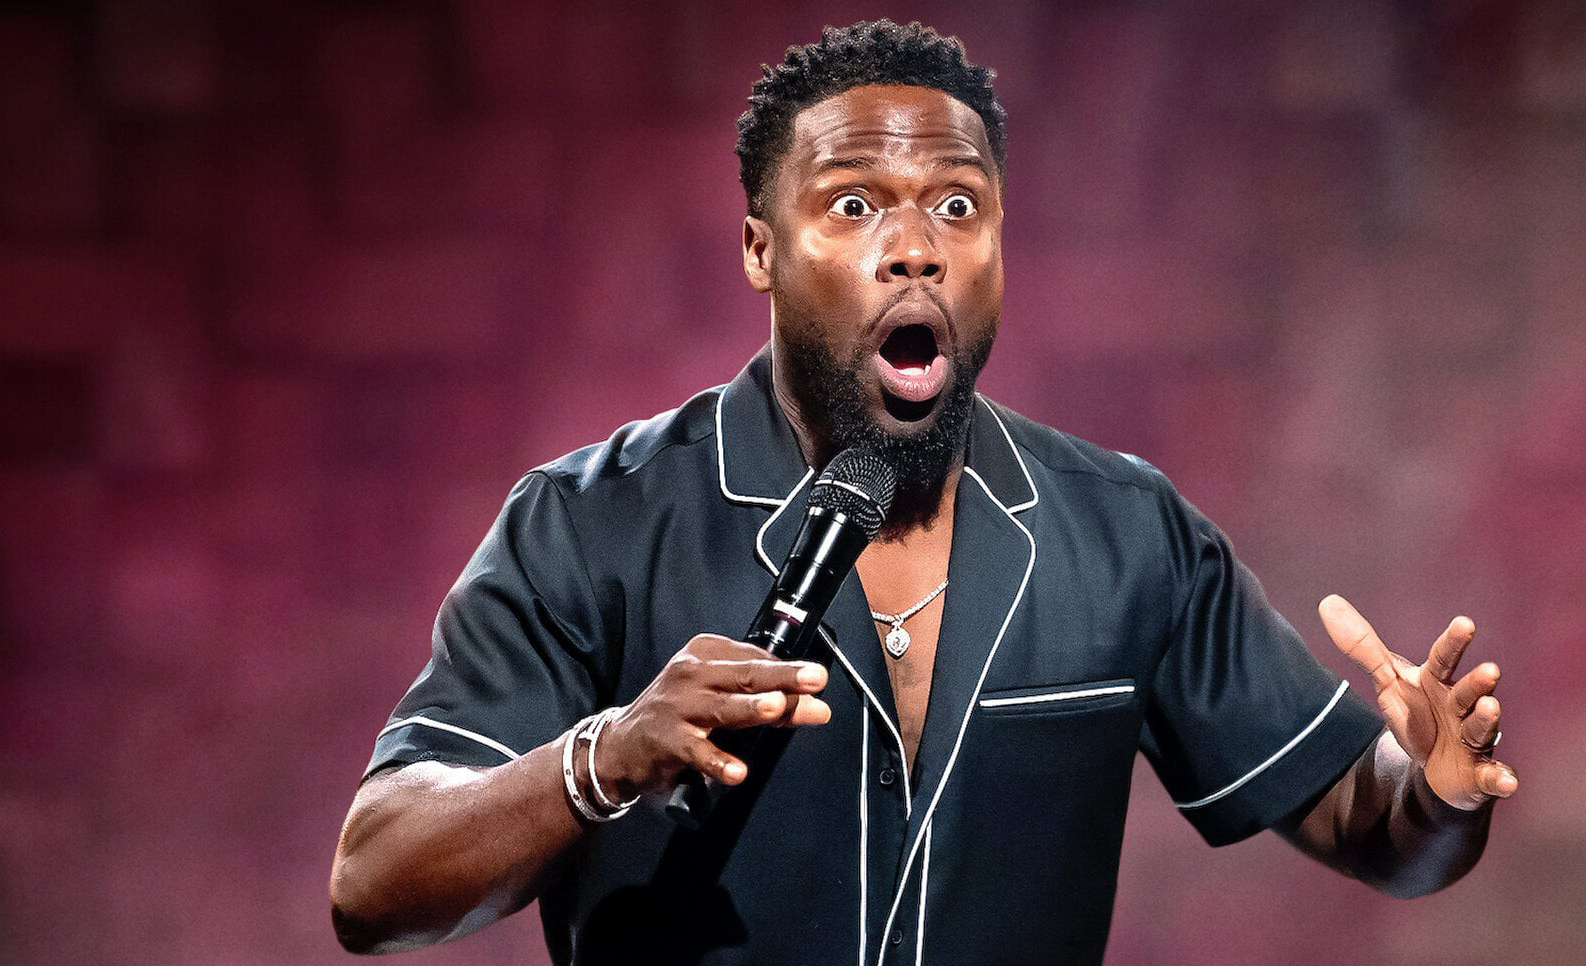 Shock! Personal Shopper stole over $ 1 million from Kevin Hart!